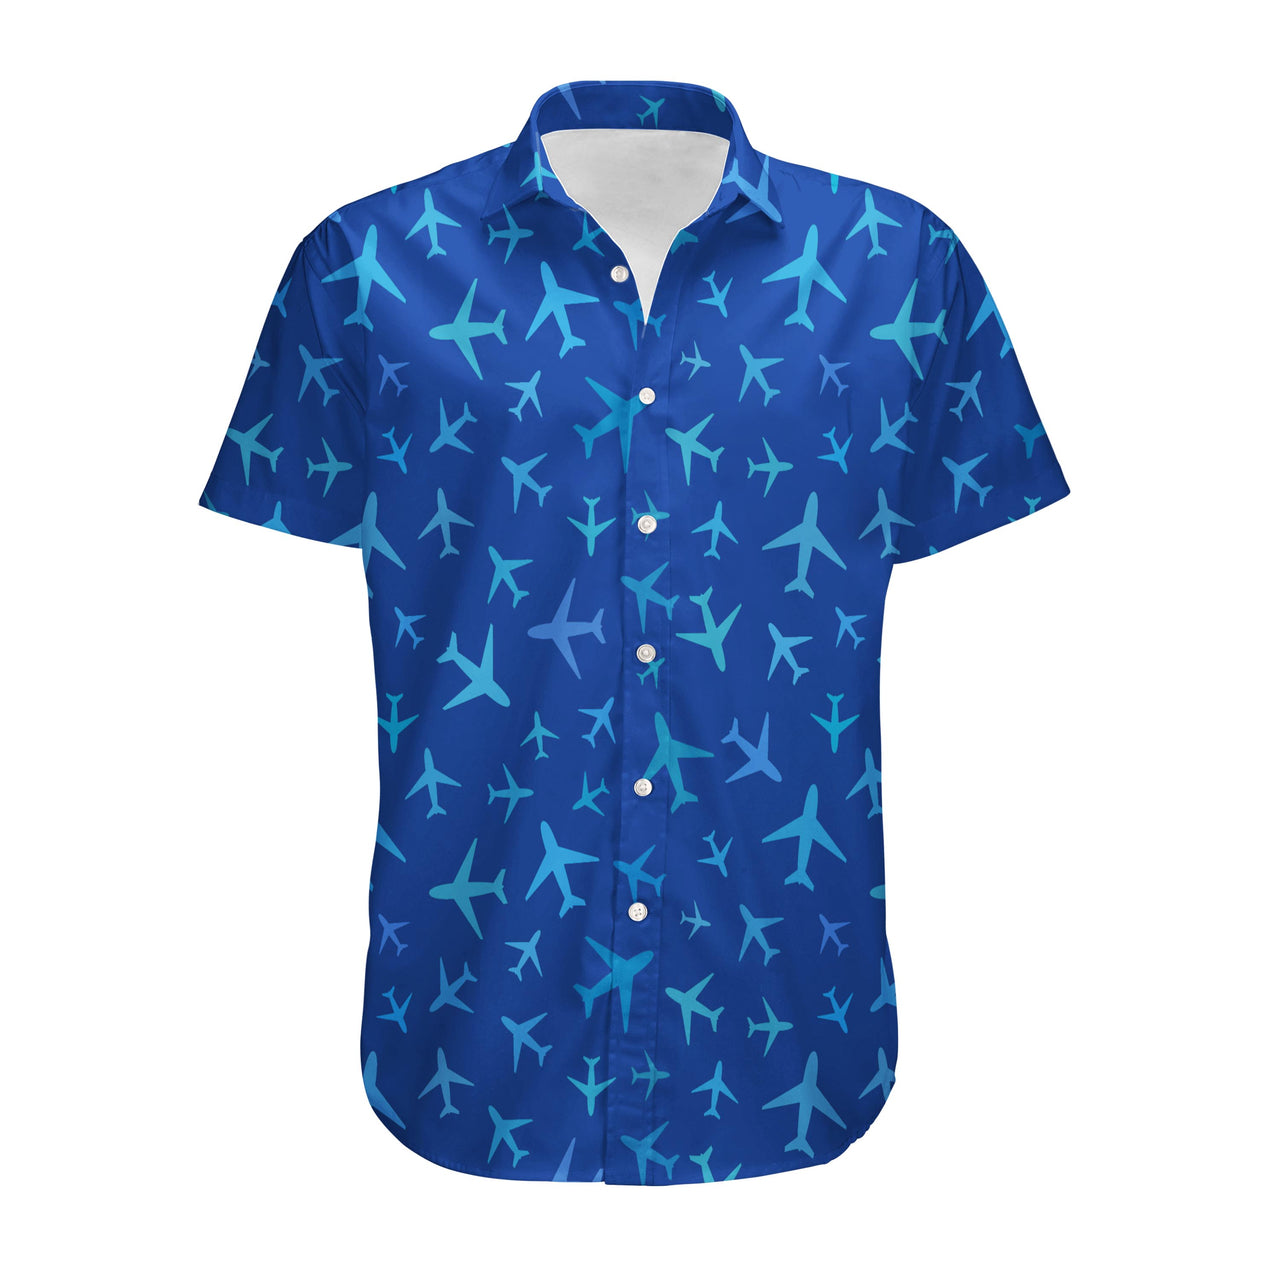 Many Airplanes (Blue) Designed 3D Shirts